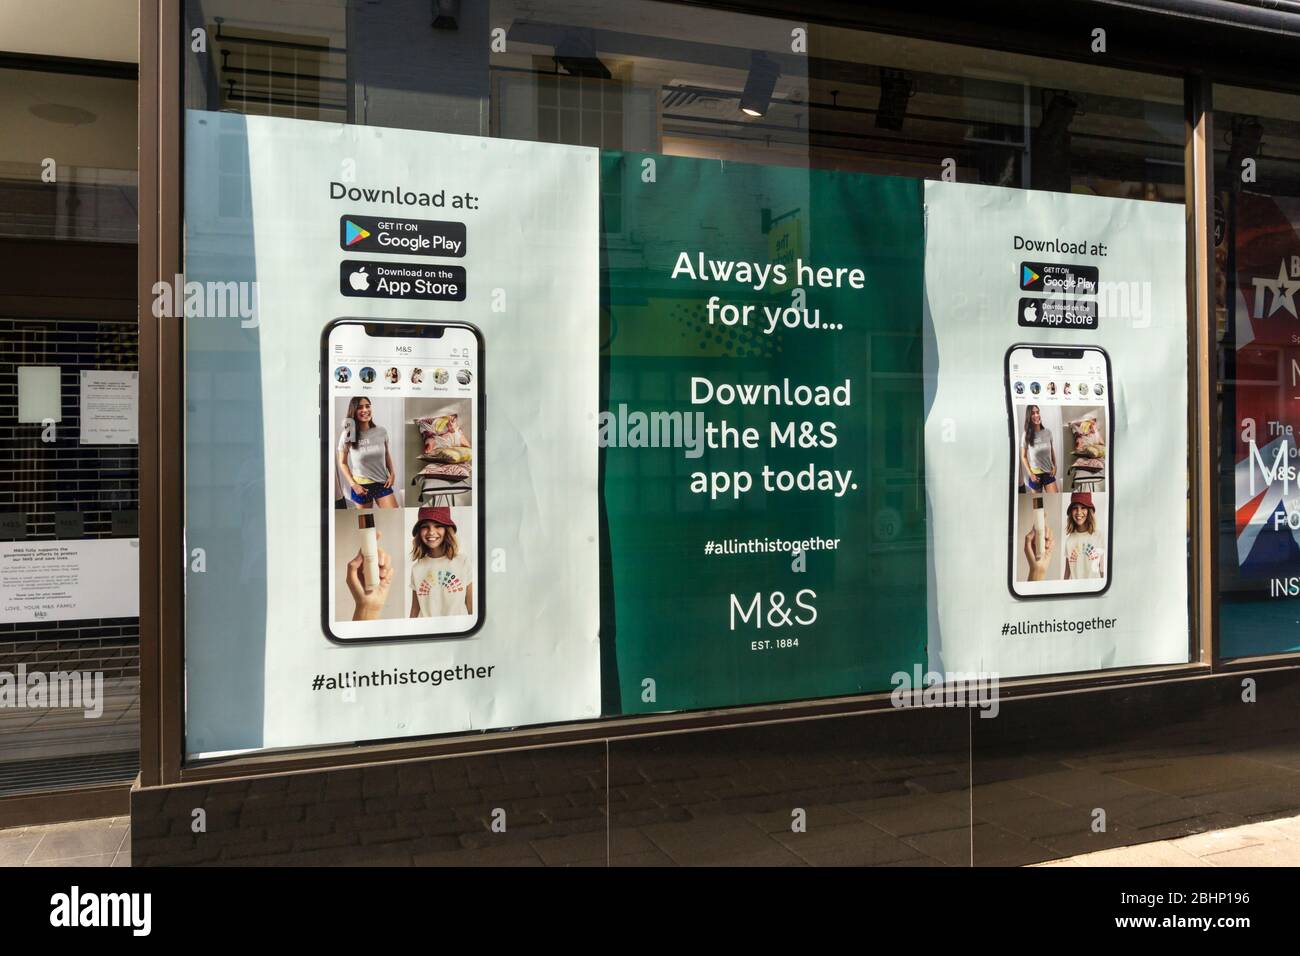 Promotion for the M&S App in a shop window during the 2020 COVID-19 Coronavirus pandemic. Stock Photo